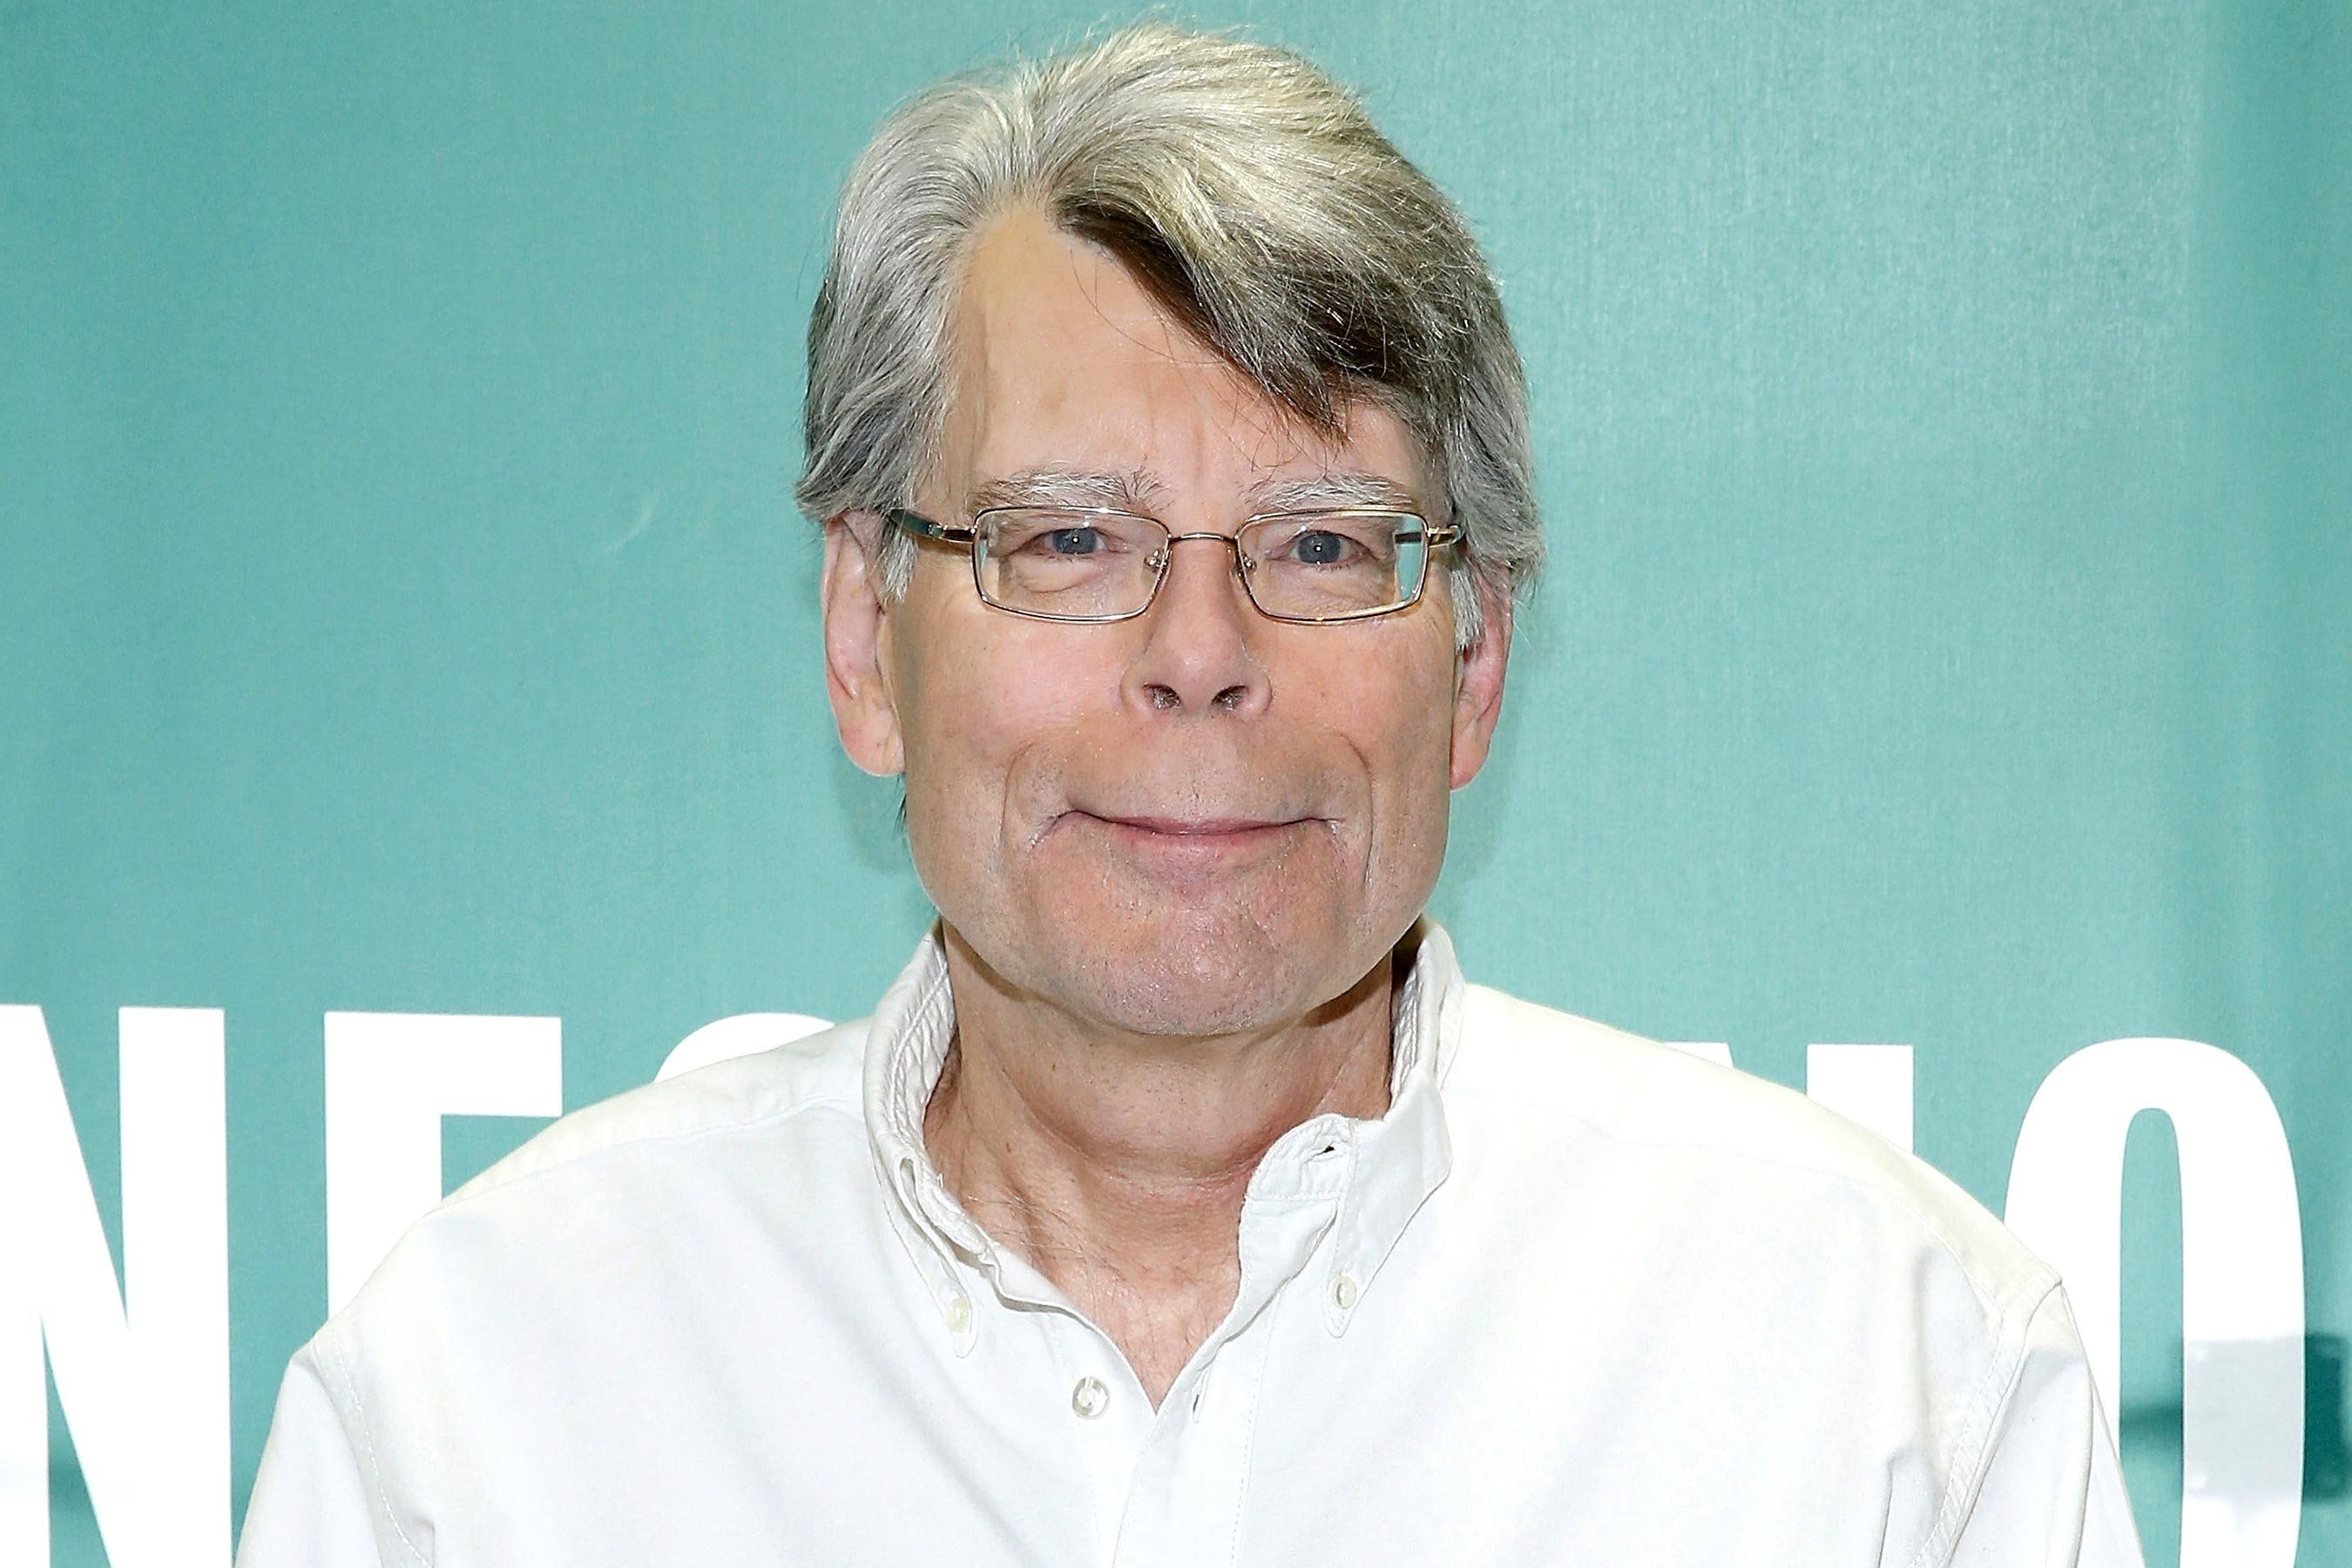 Another Stephen King novel is getting made into a movie